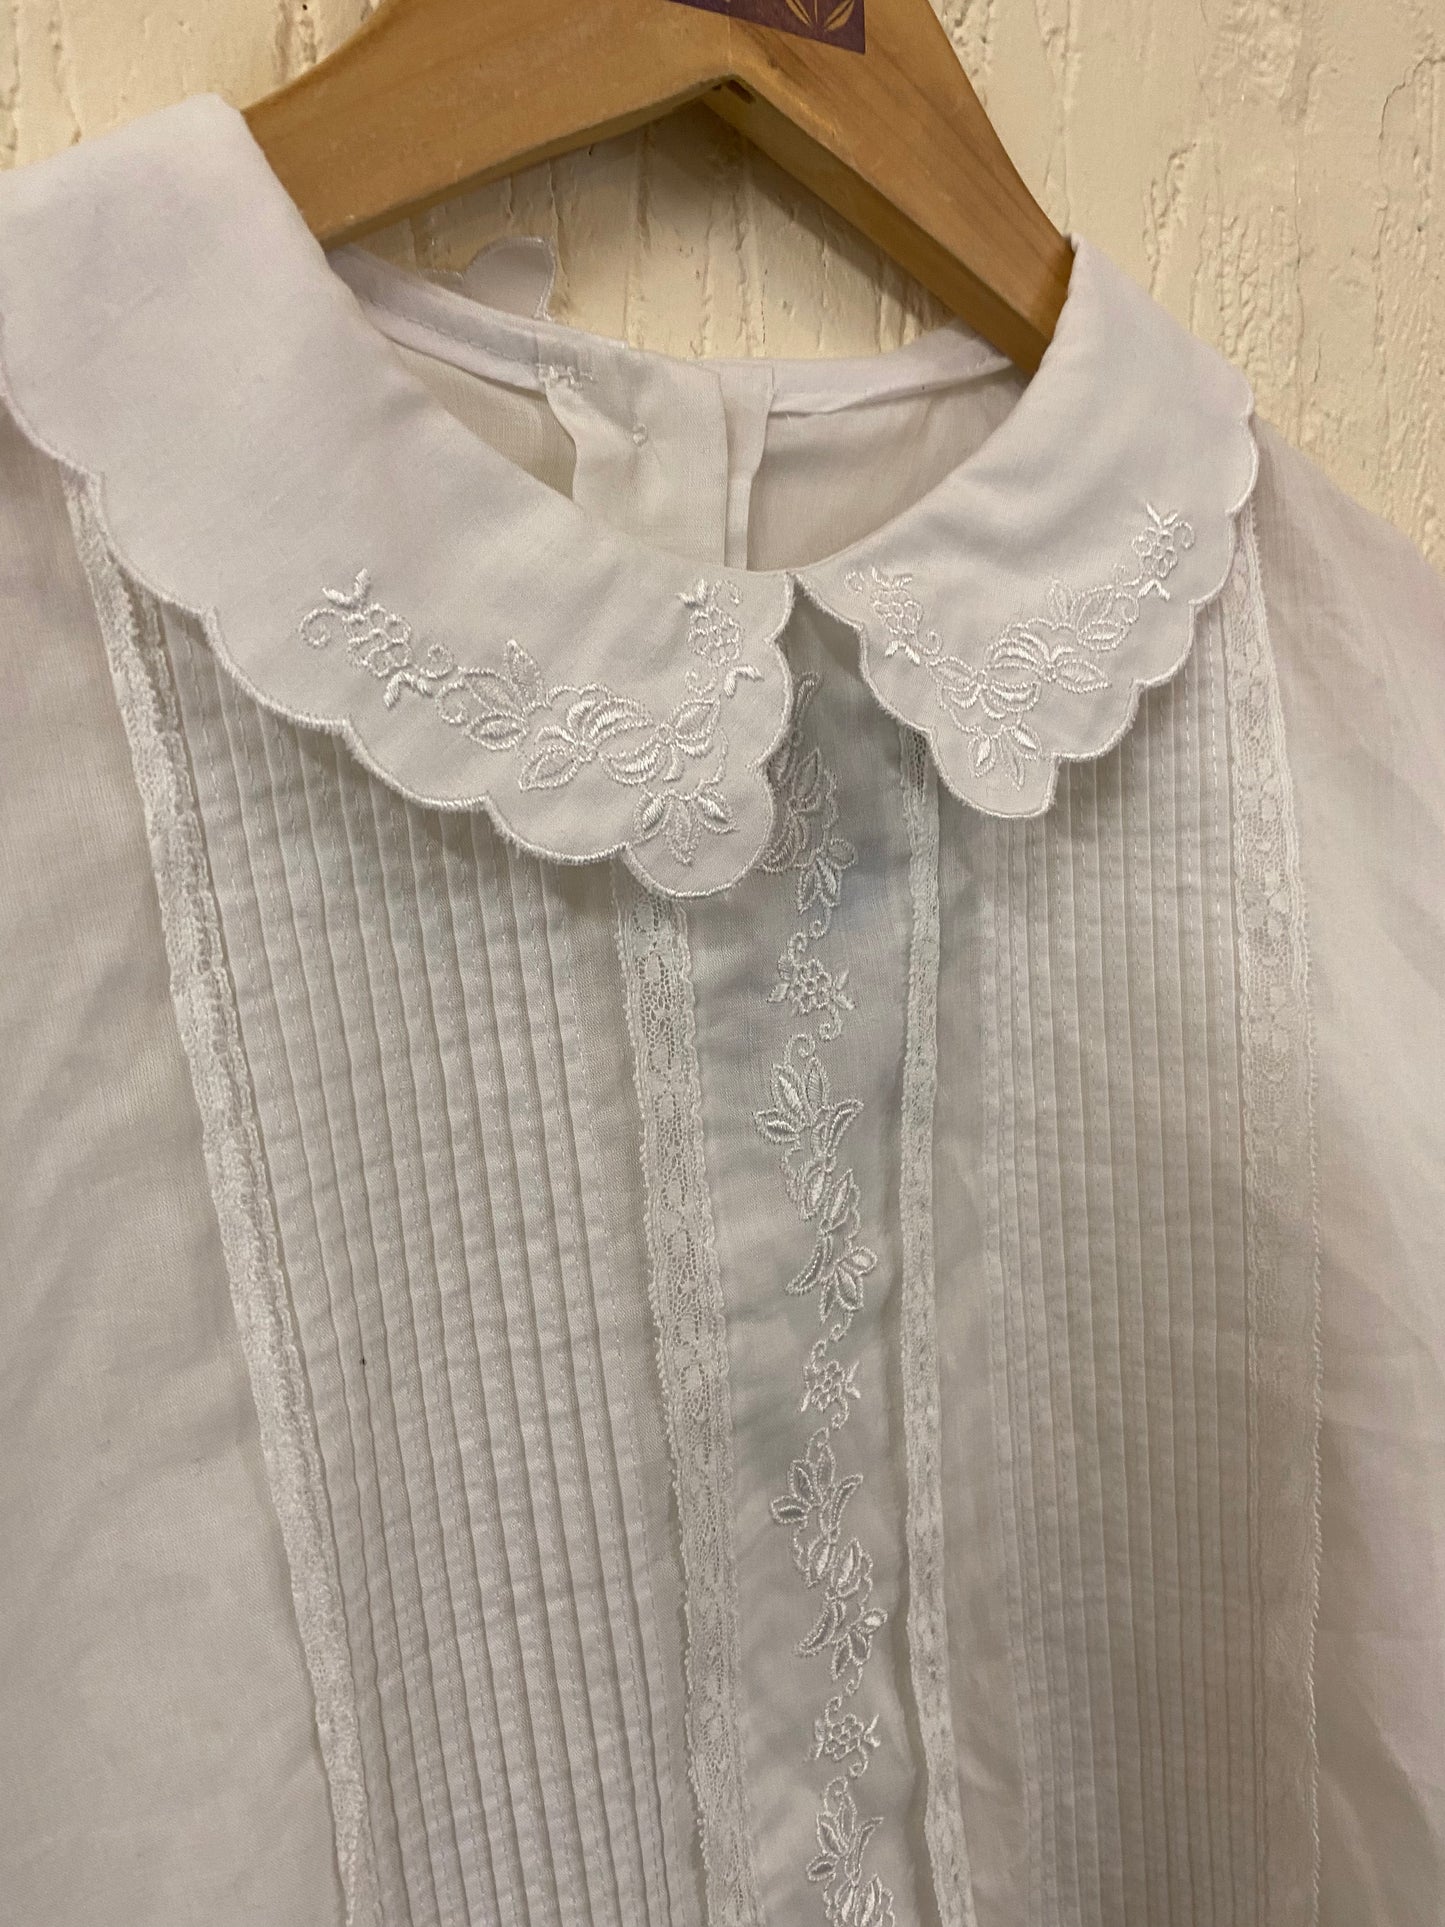 Vintage St Michael White  Blouse with Pin Tucks and Lace Collar Size 14